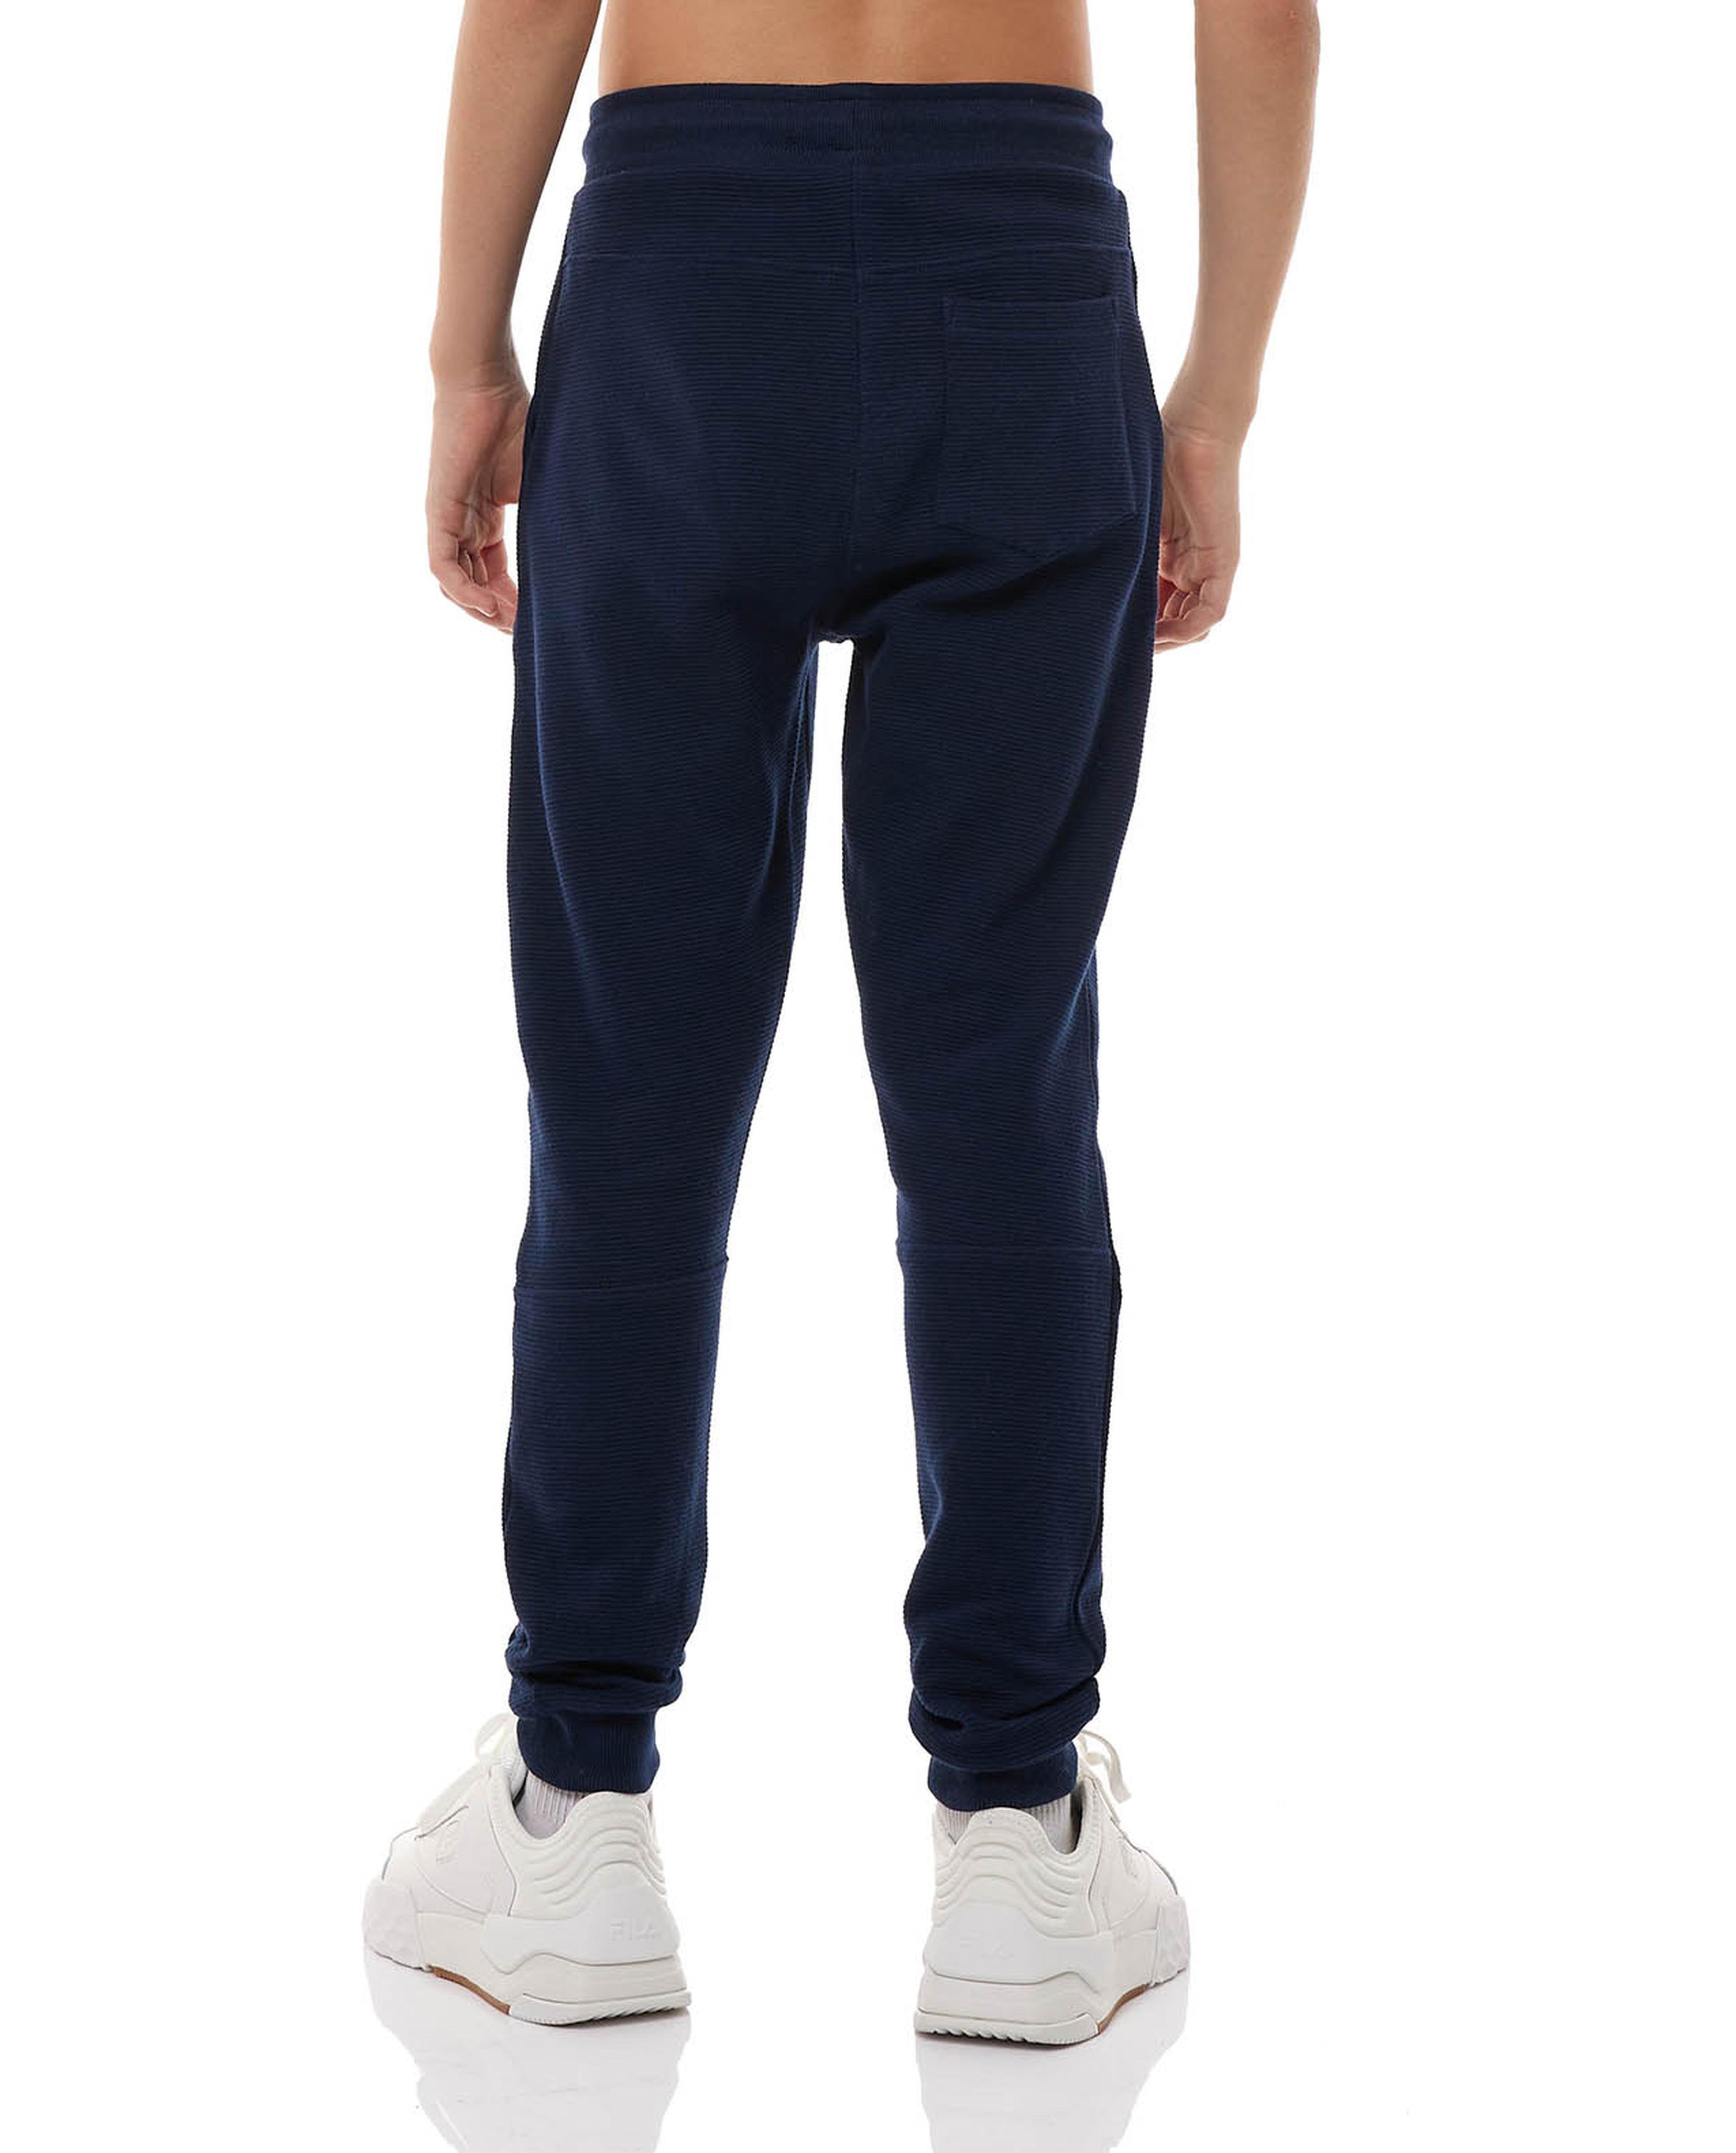 Embroidery Detail Joggers with Drawstring Waist